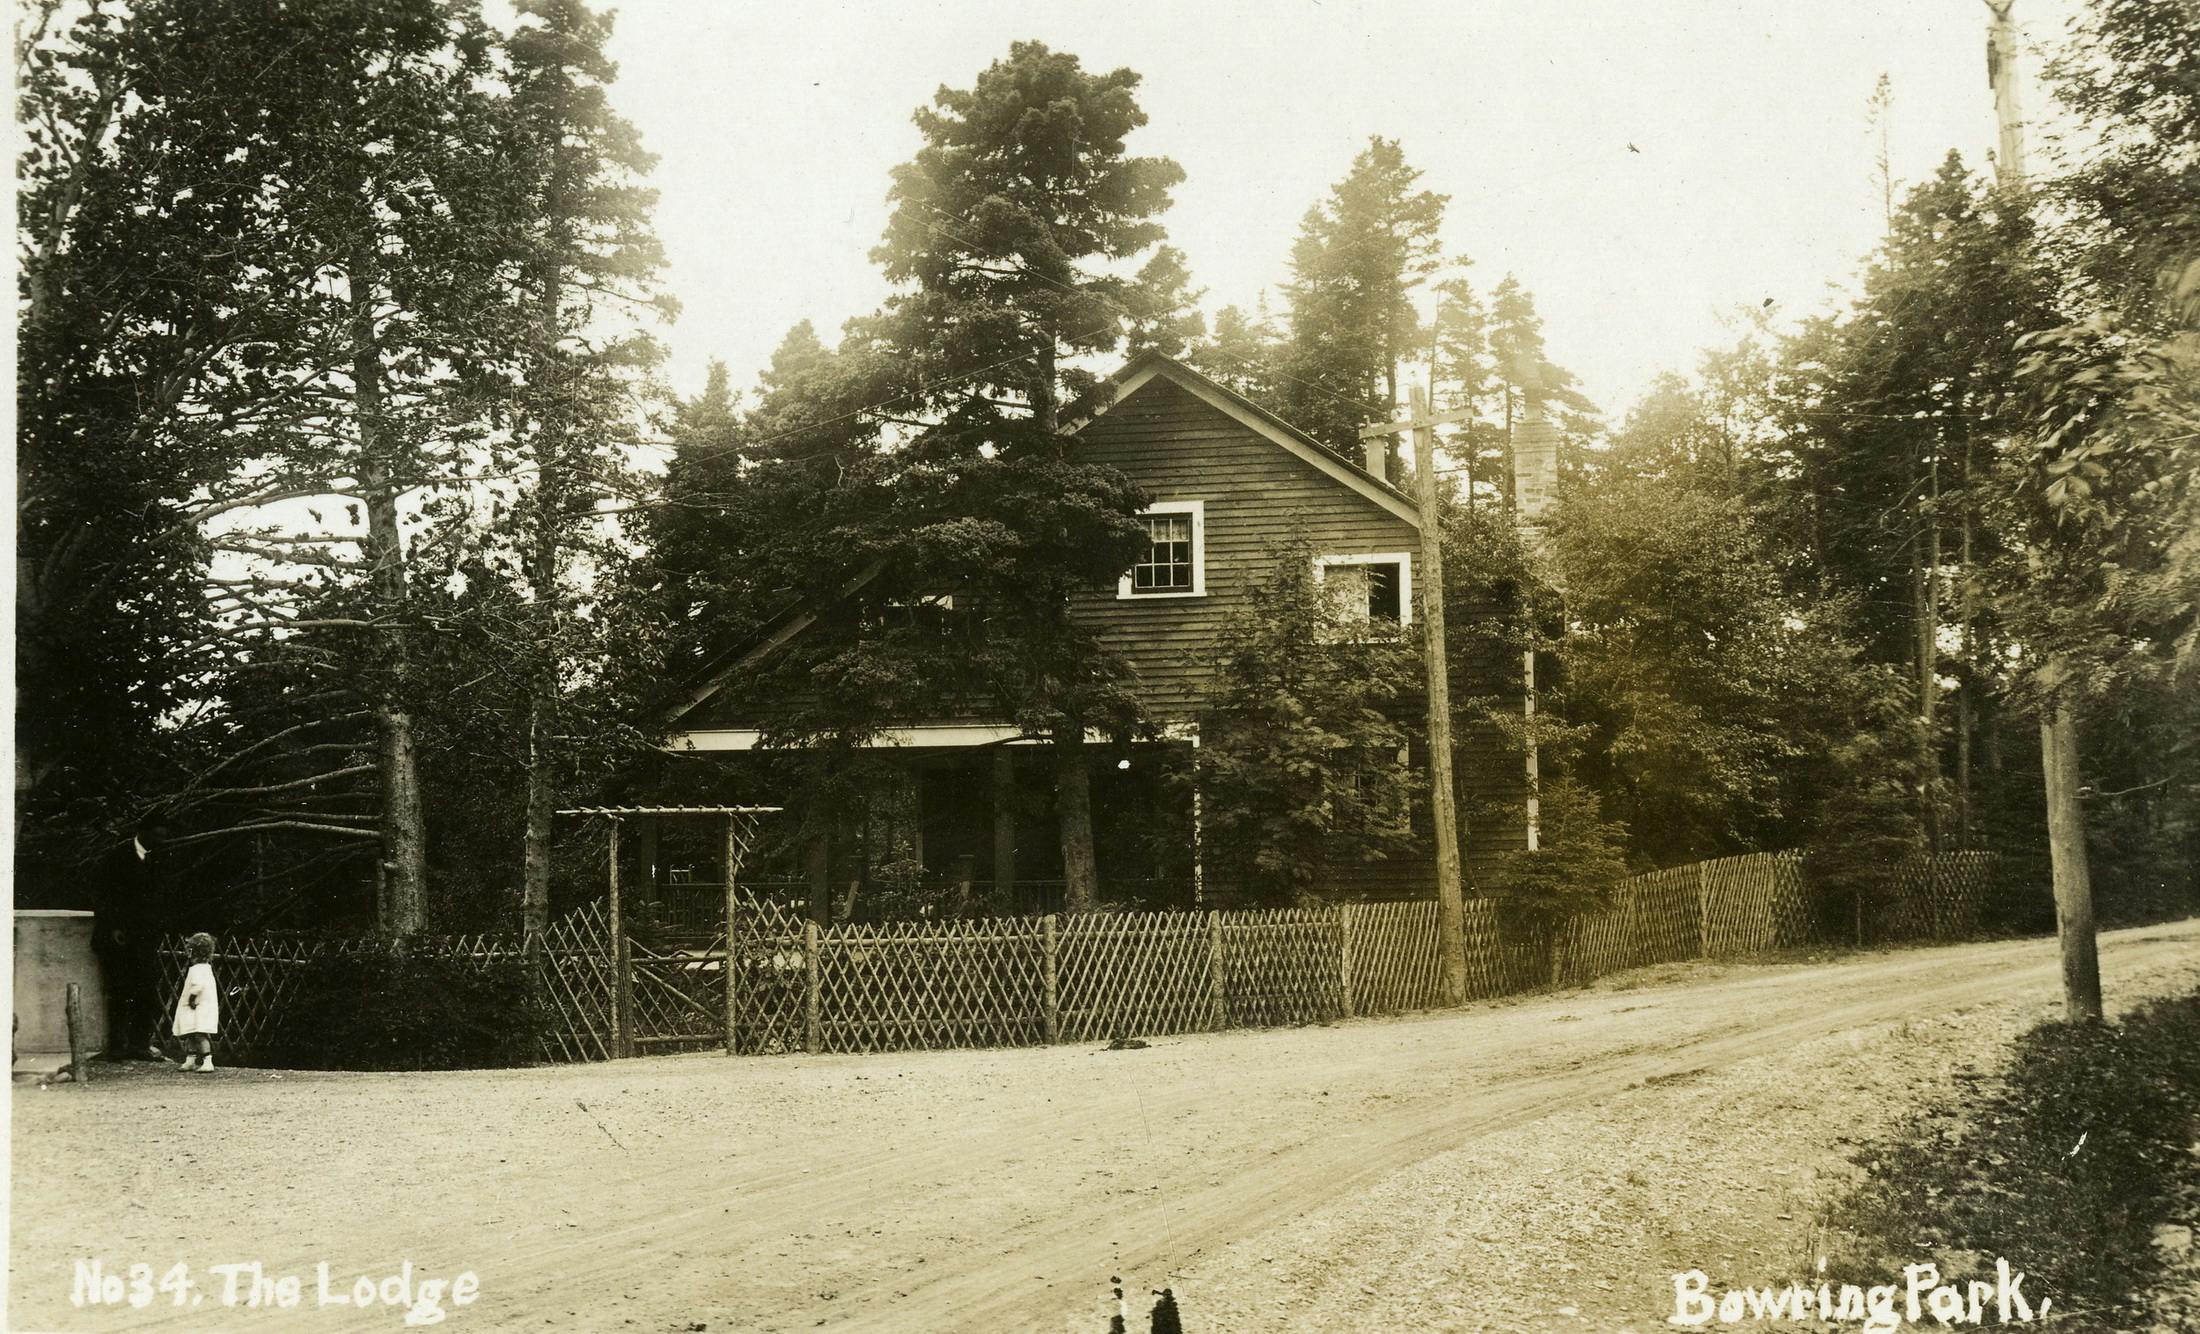 The Original Lodge City Of St. Johns Archives Photo 